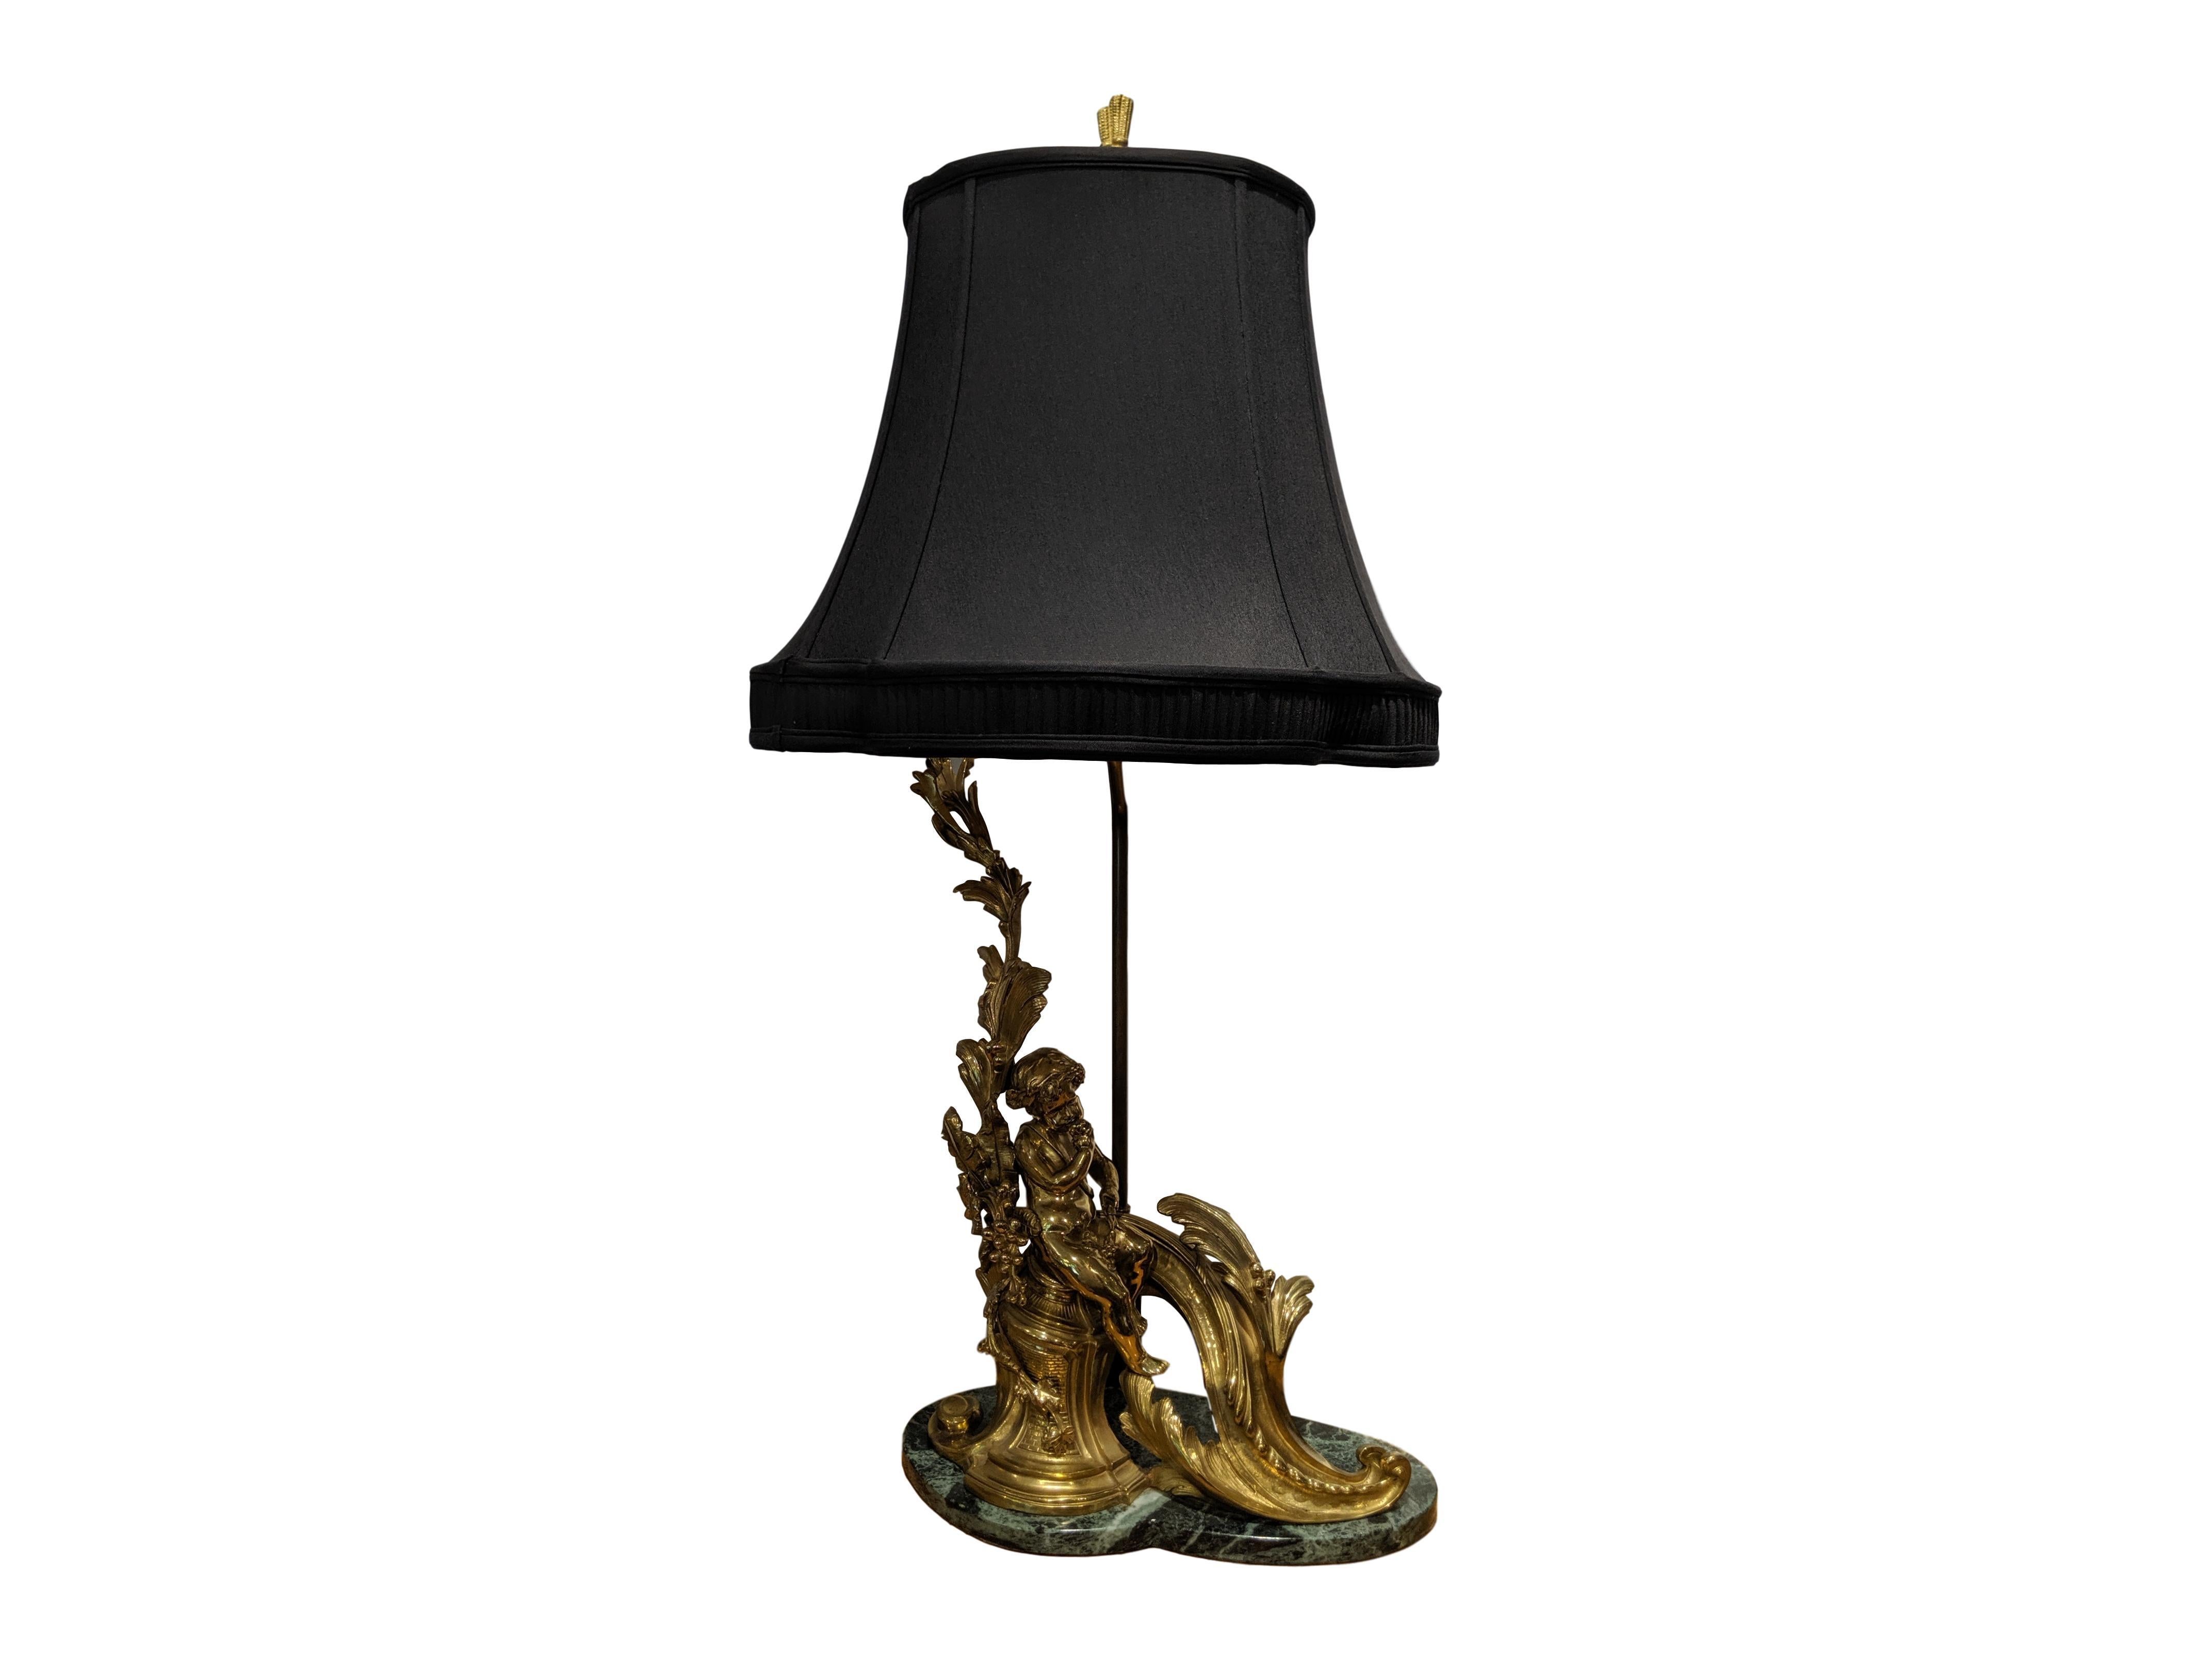 Stunning high quality pair of 19th Century French ormolu cherub like Chenet lamps mounted on marble with black pagoda shaped shades.